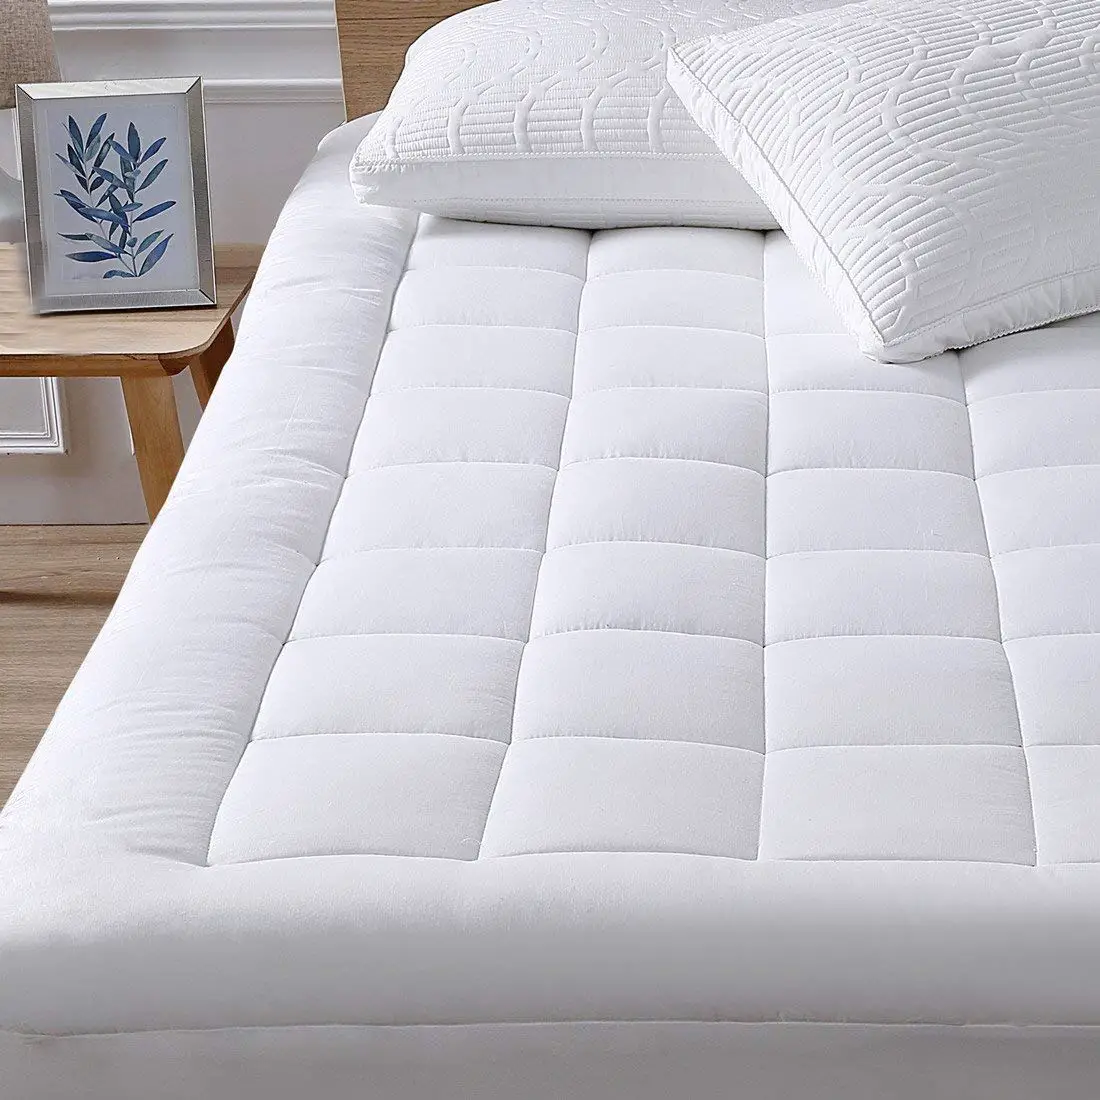 Queen Size Mattress Pad Cover Memory Foam Pillow Top Topper Thick ...